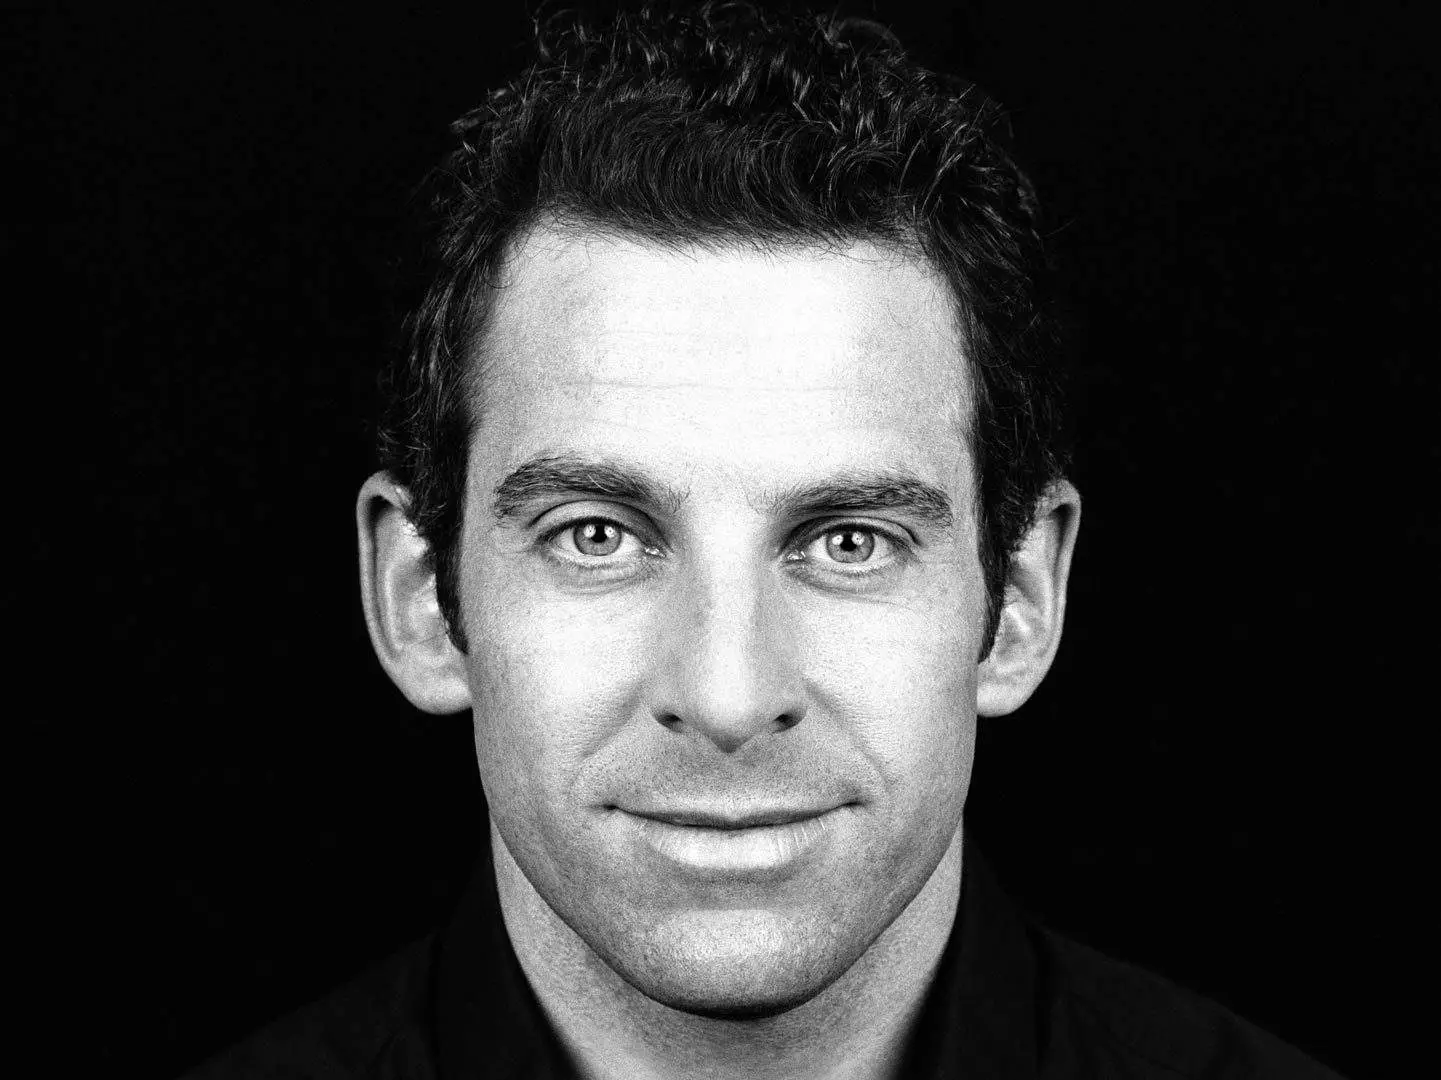 Sam Harris’s kind of thought experiment